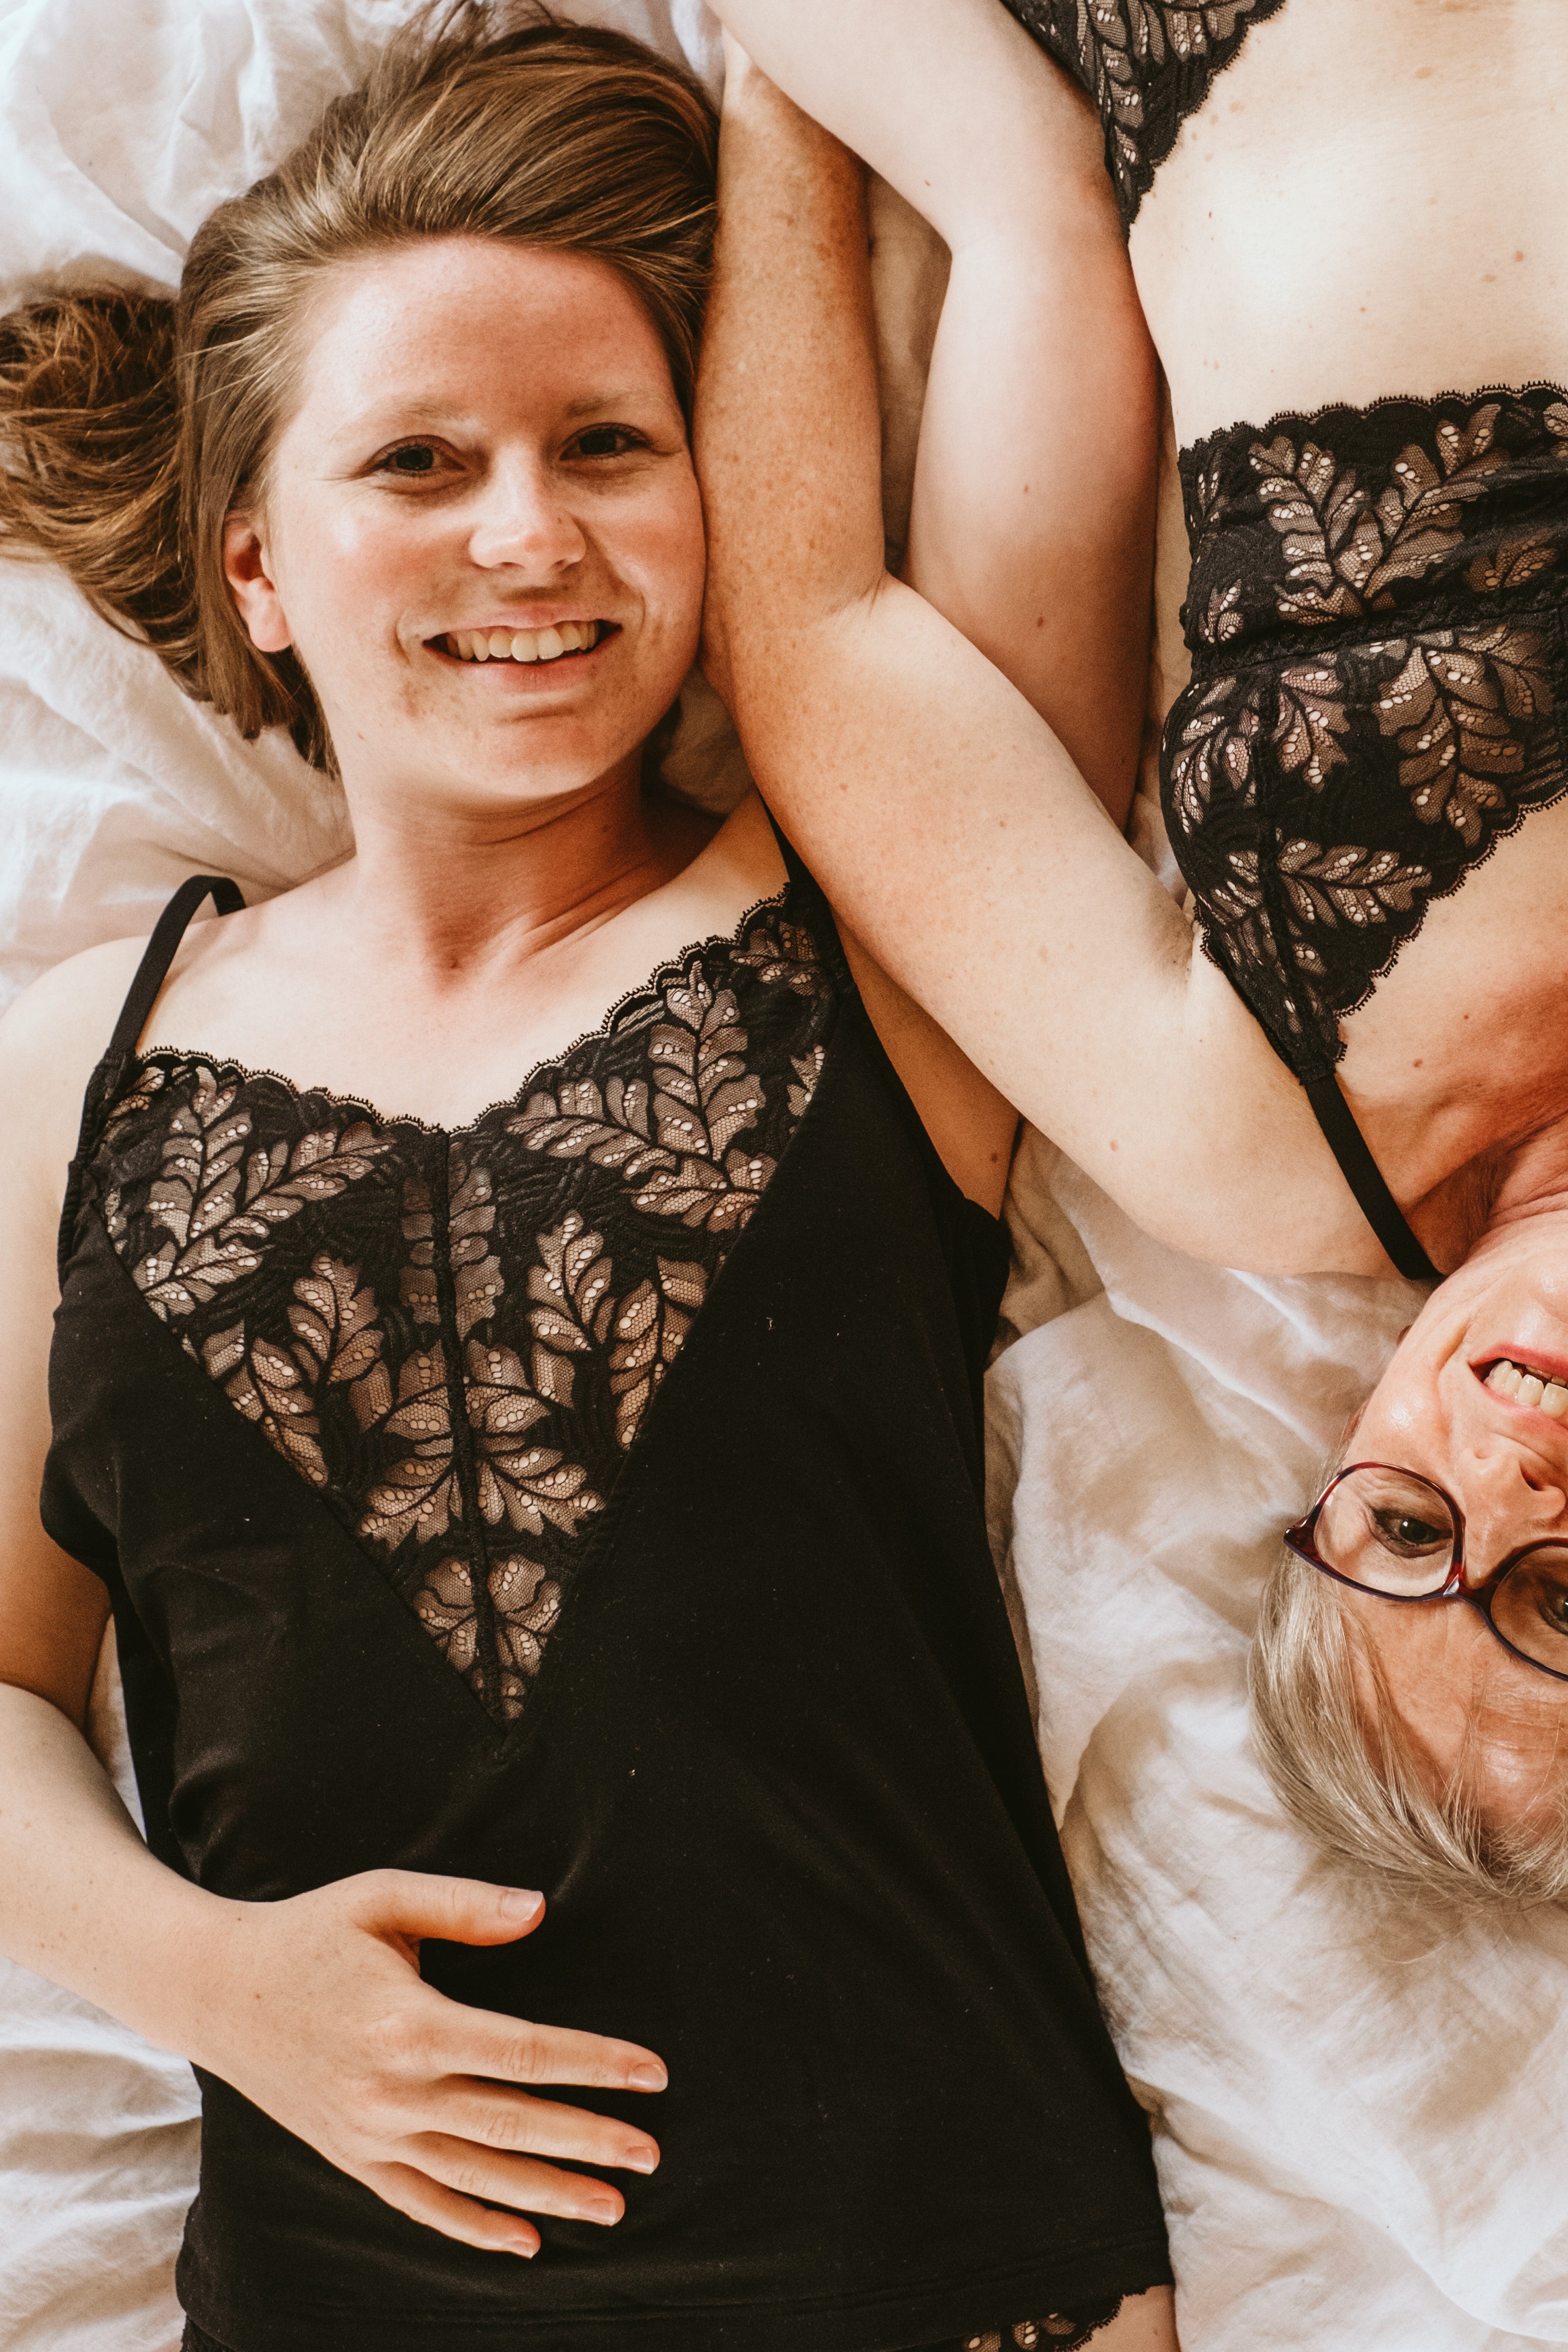 Mother and daughter are lying together on the bed, both are wearing black underwear.